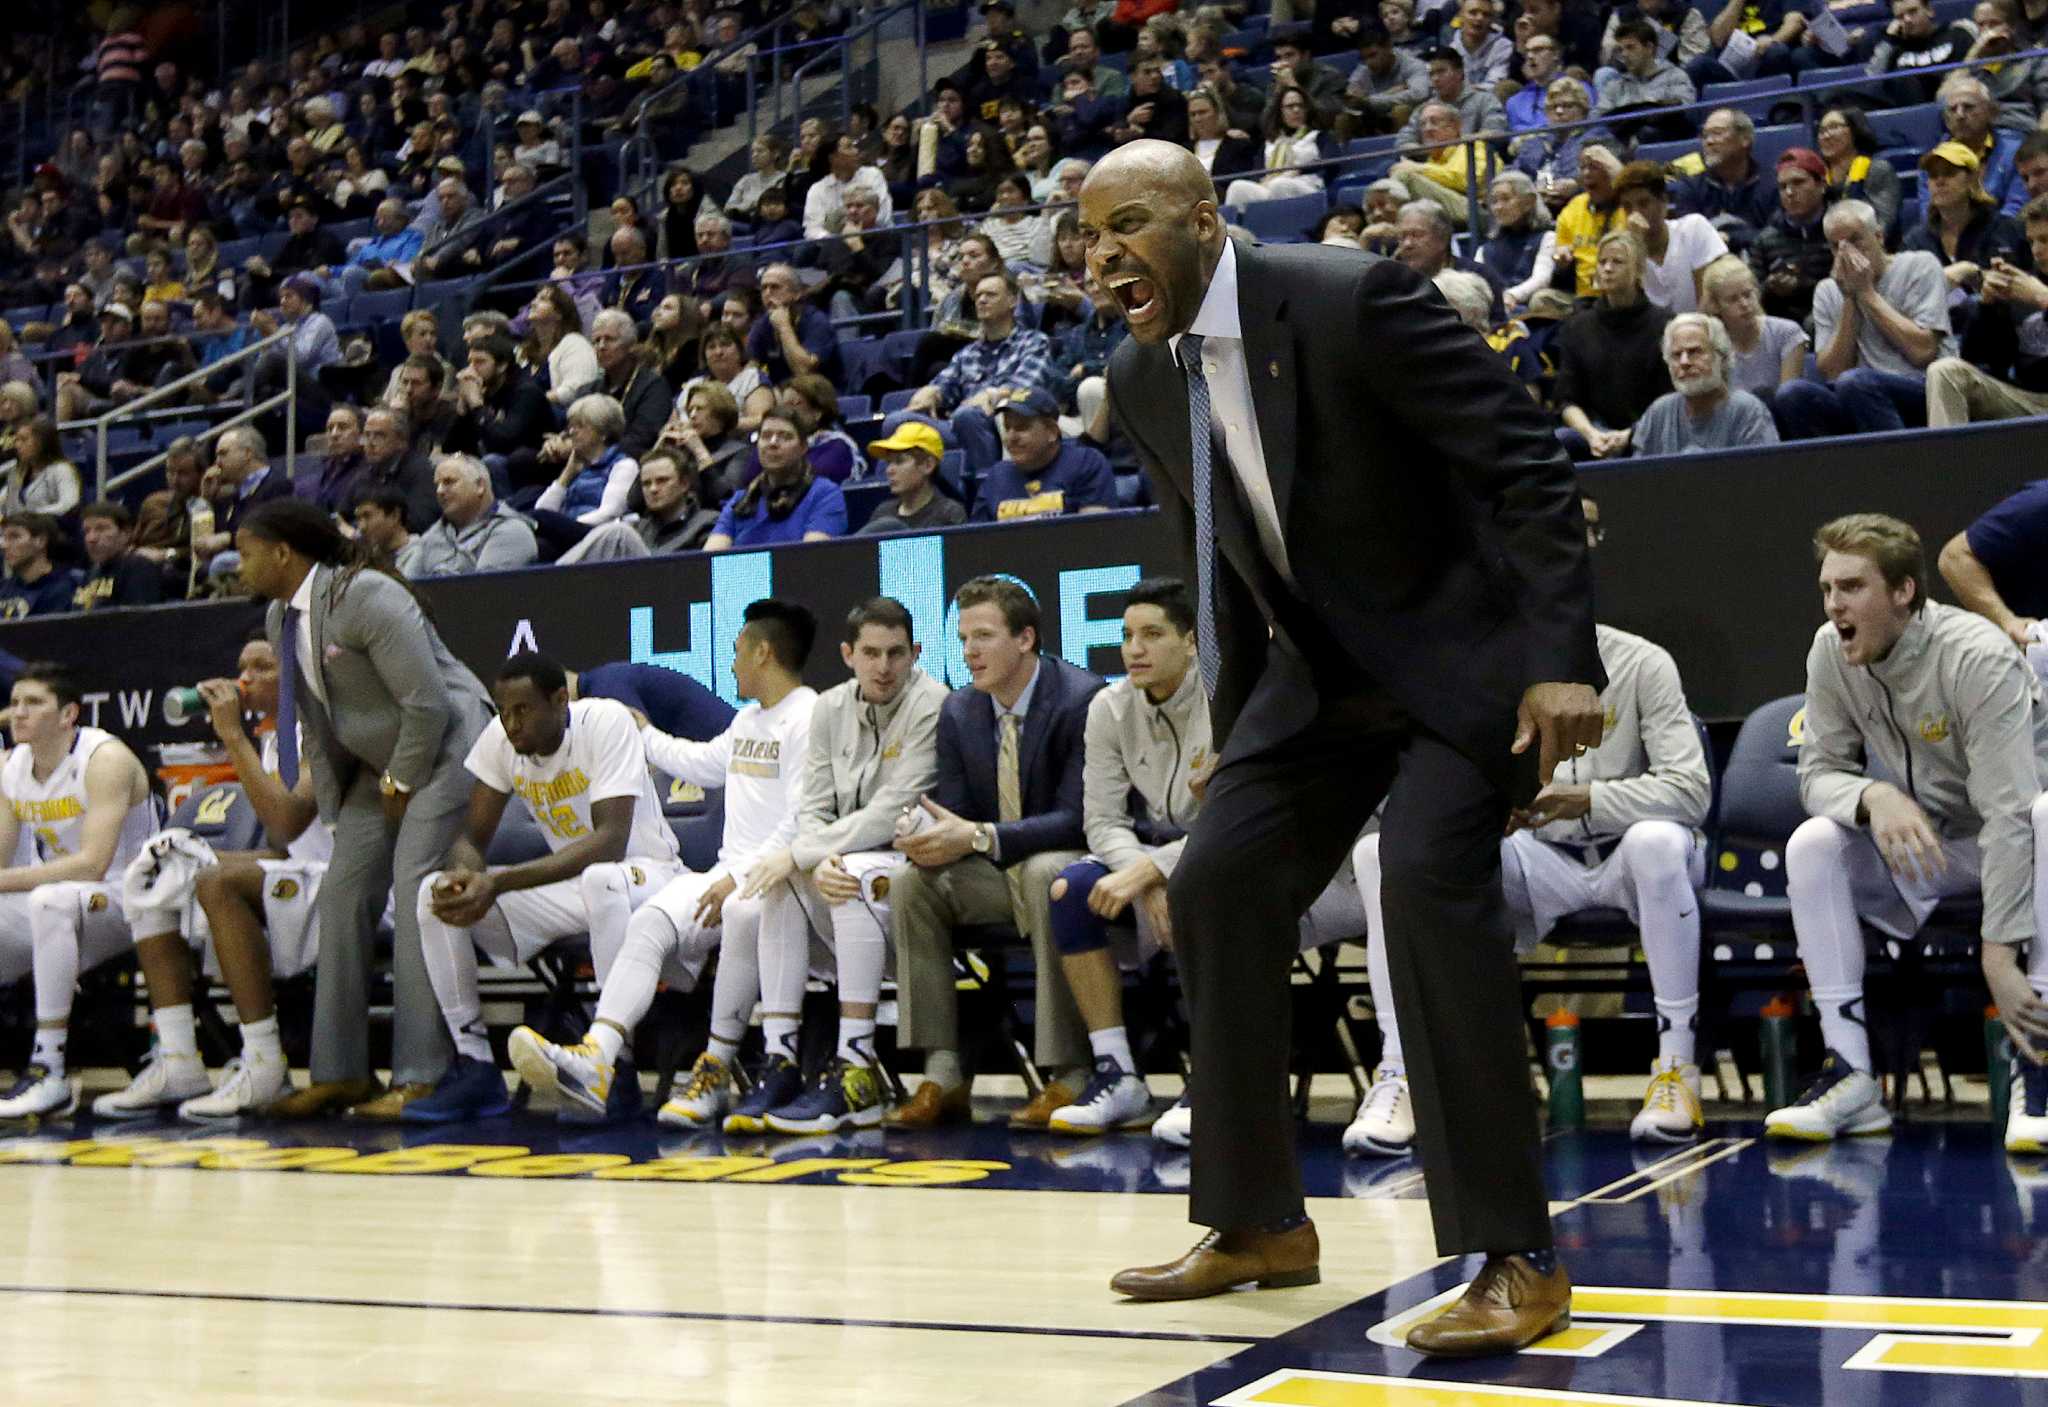 Cal coach Cuonzo Martin has fielded yet another stingy defense this season